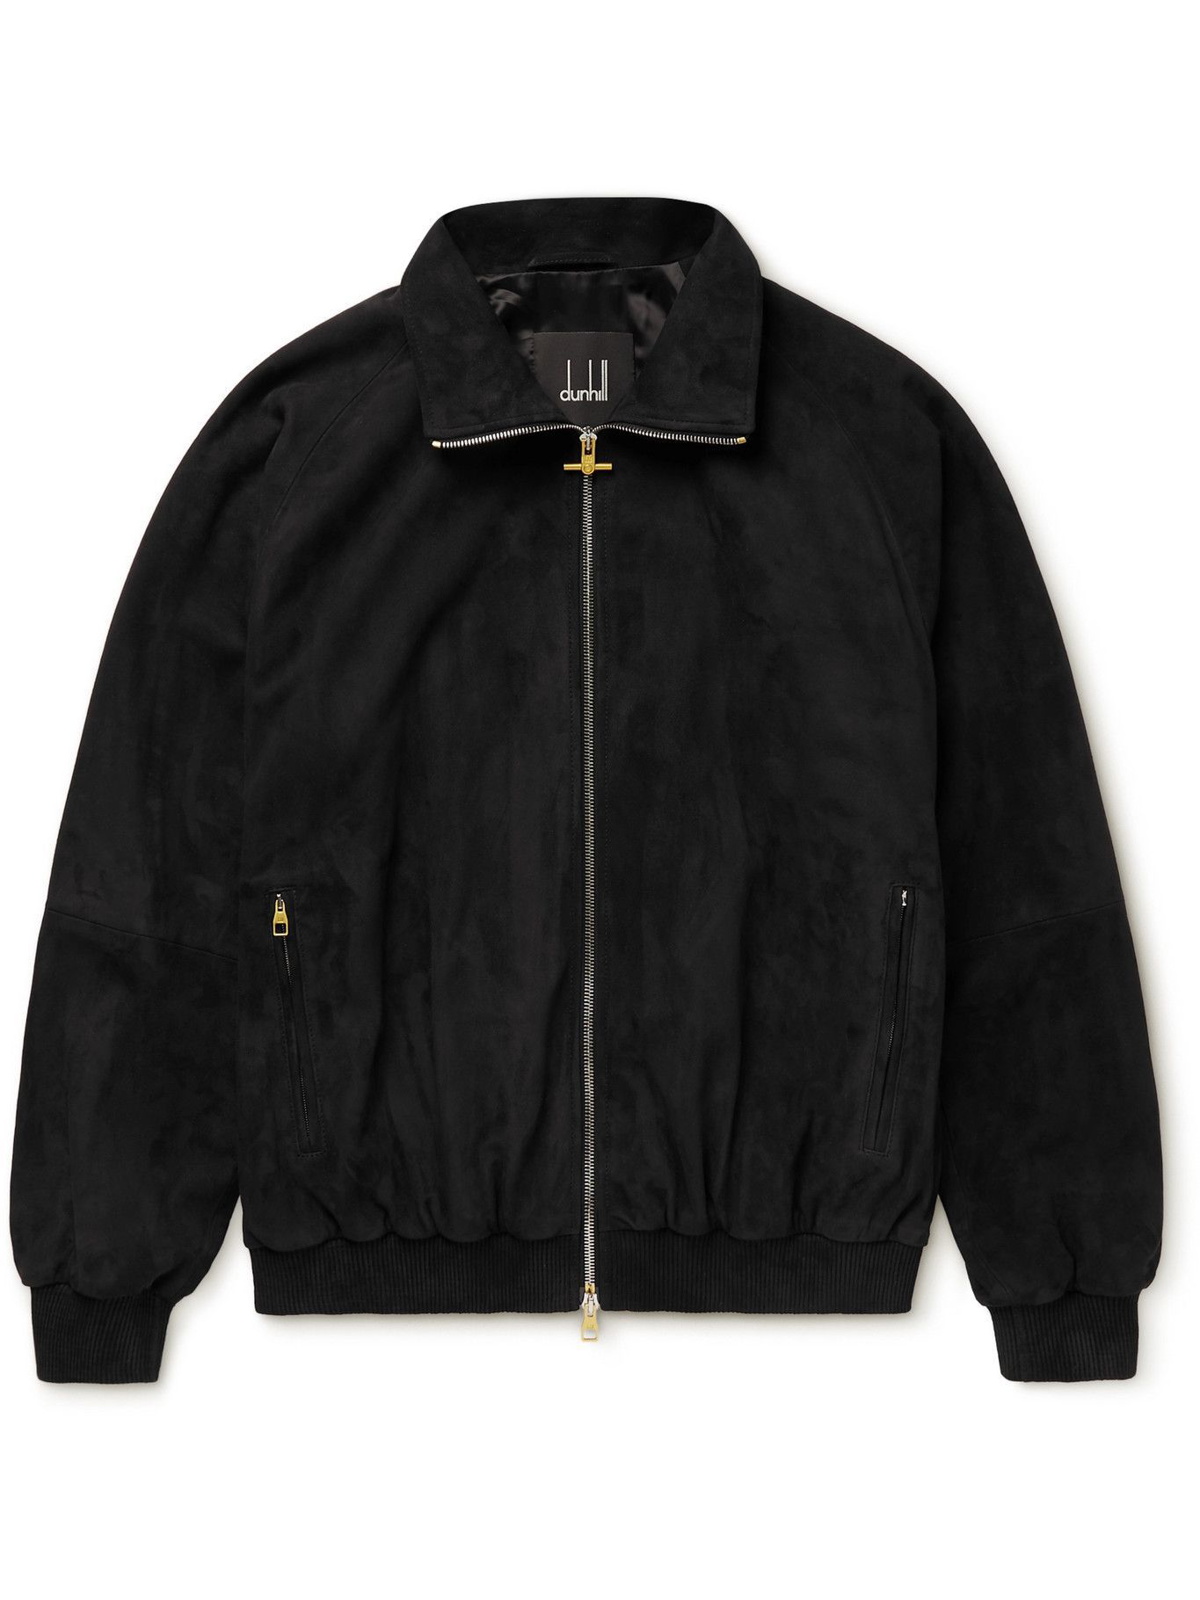 DUNHILL - Suede Jacket - Black Dunhill